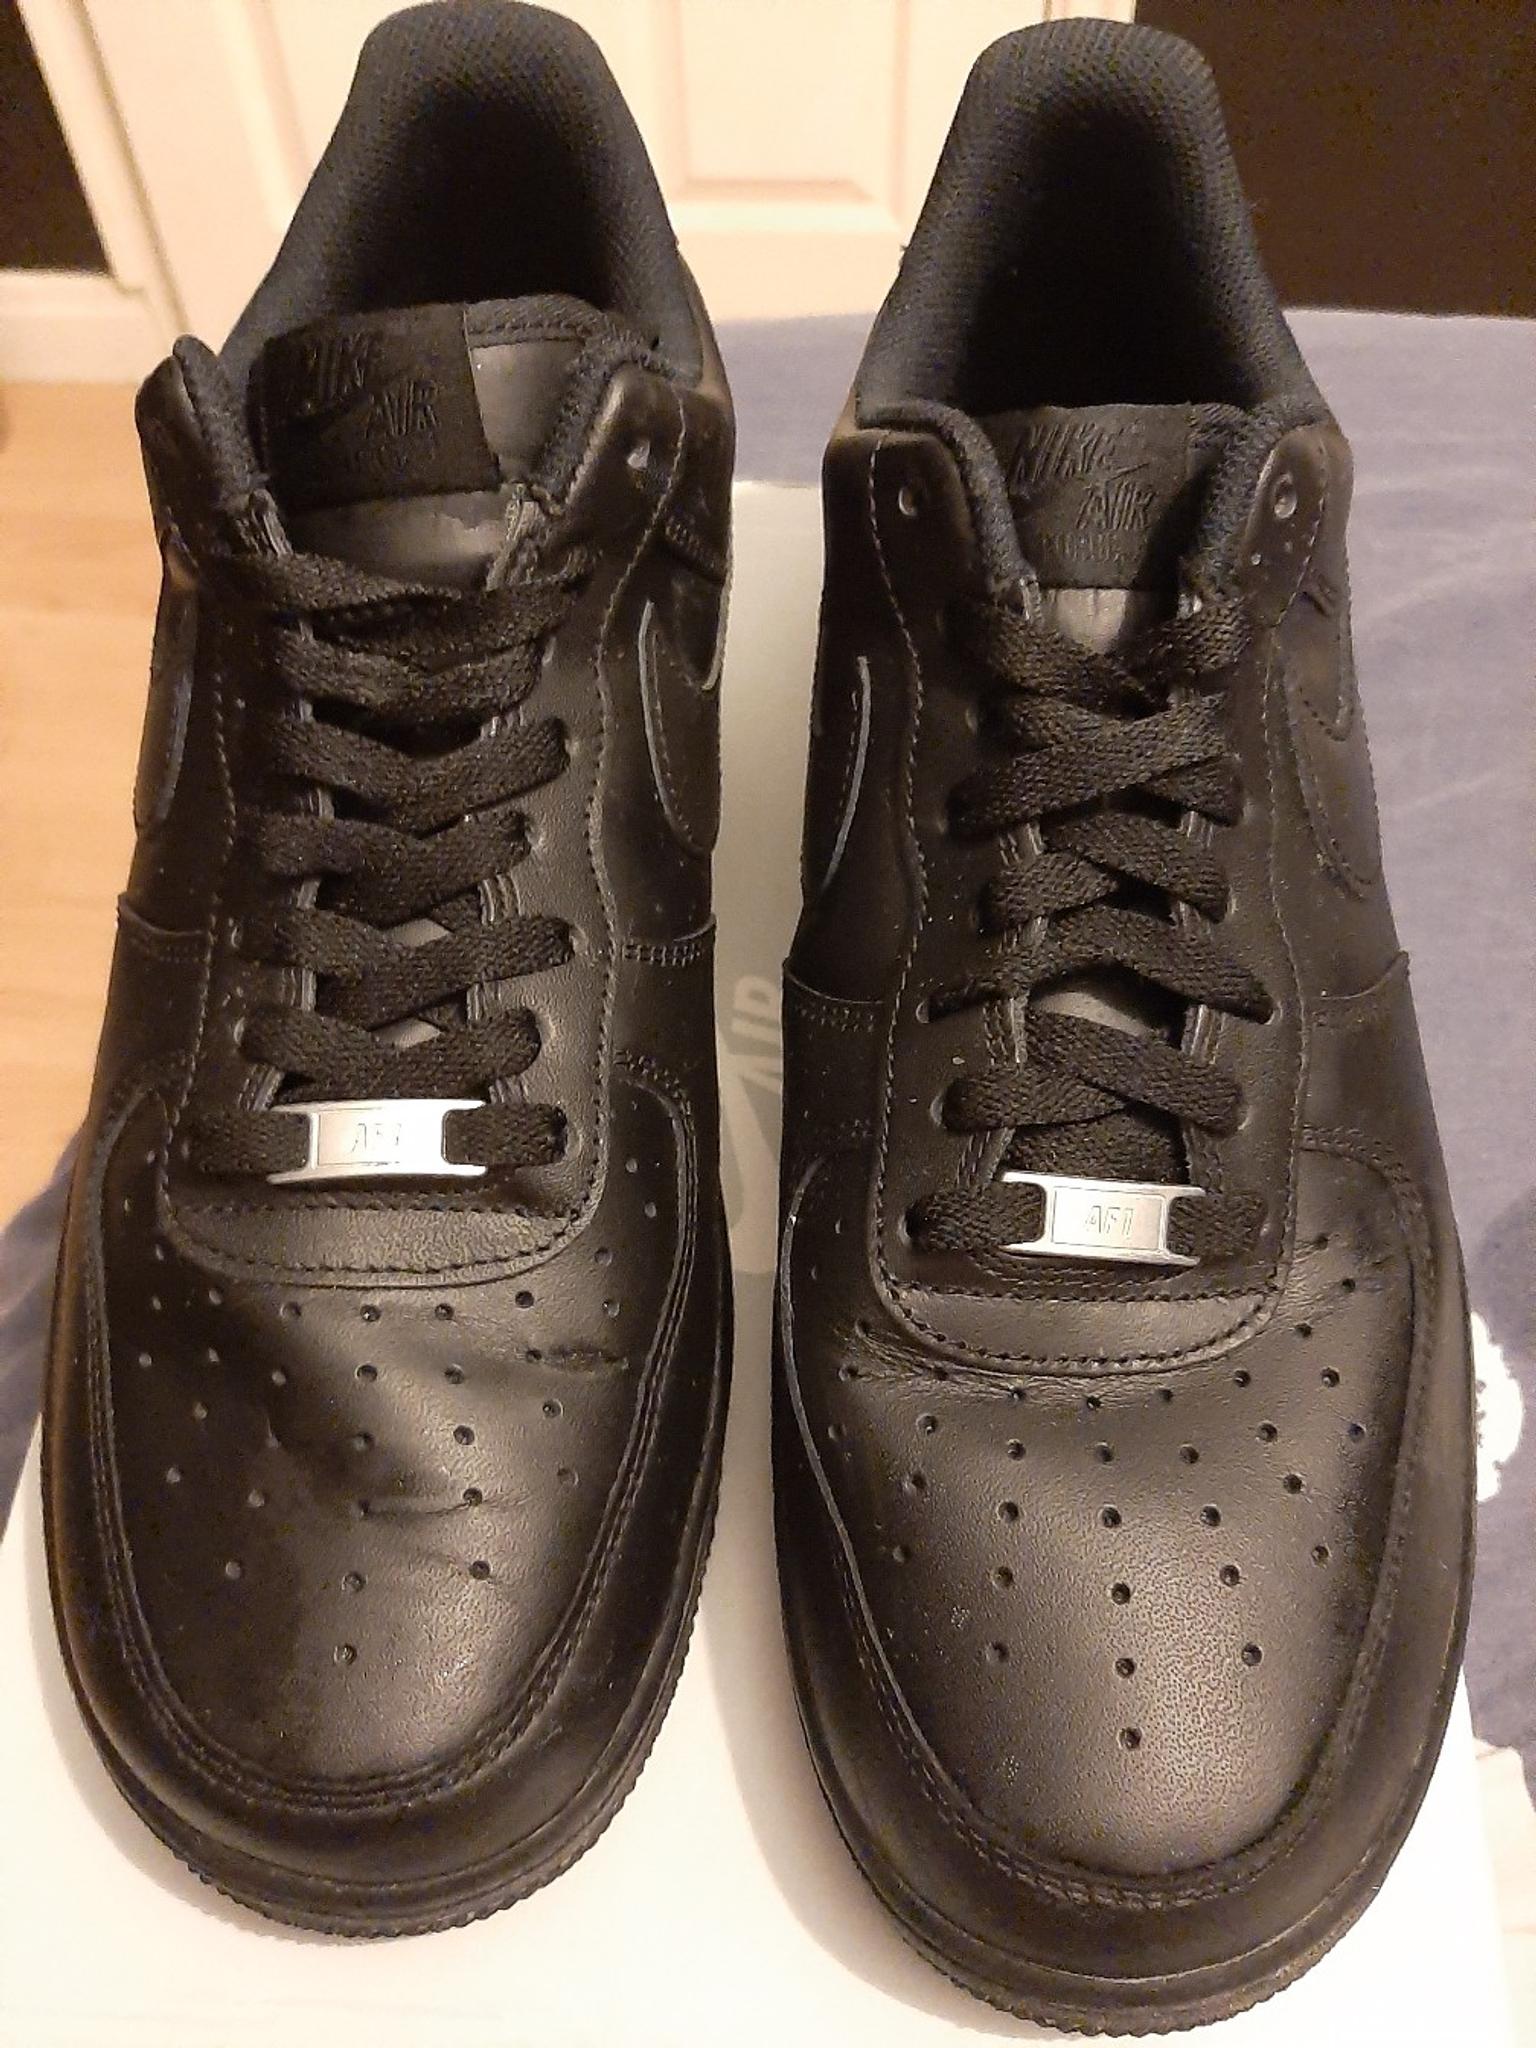 black air force 1 size 10